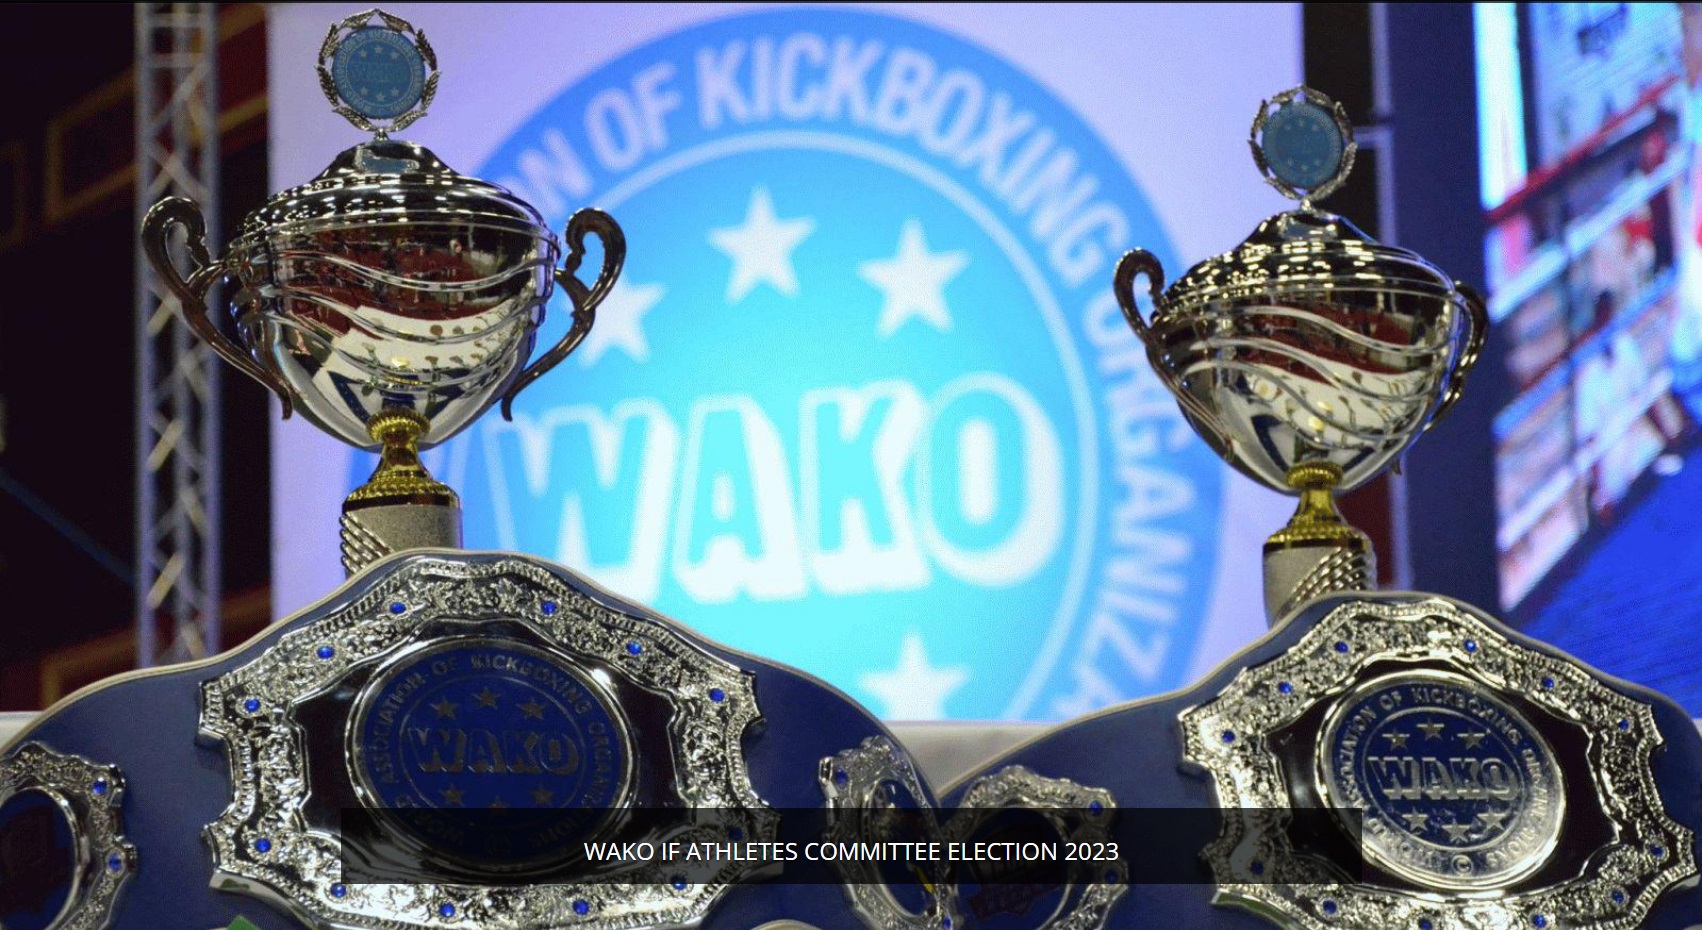 Elections of the WAKO (IF) Athletes Committee, November 14th, 2023 – Voting Tutorial